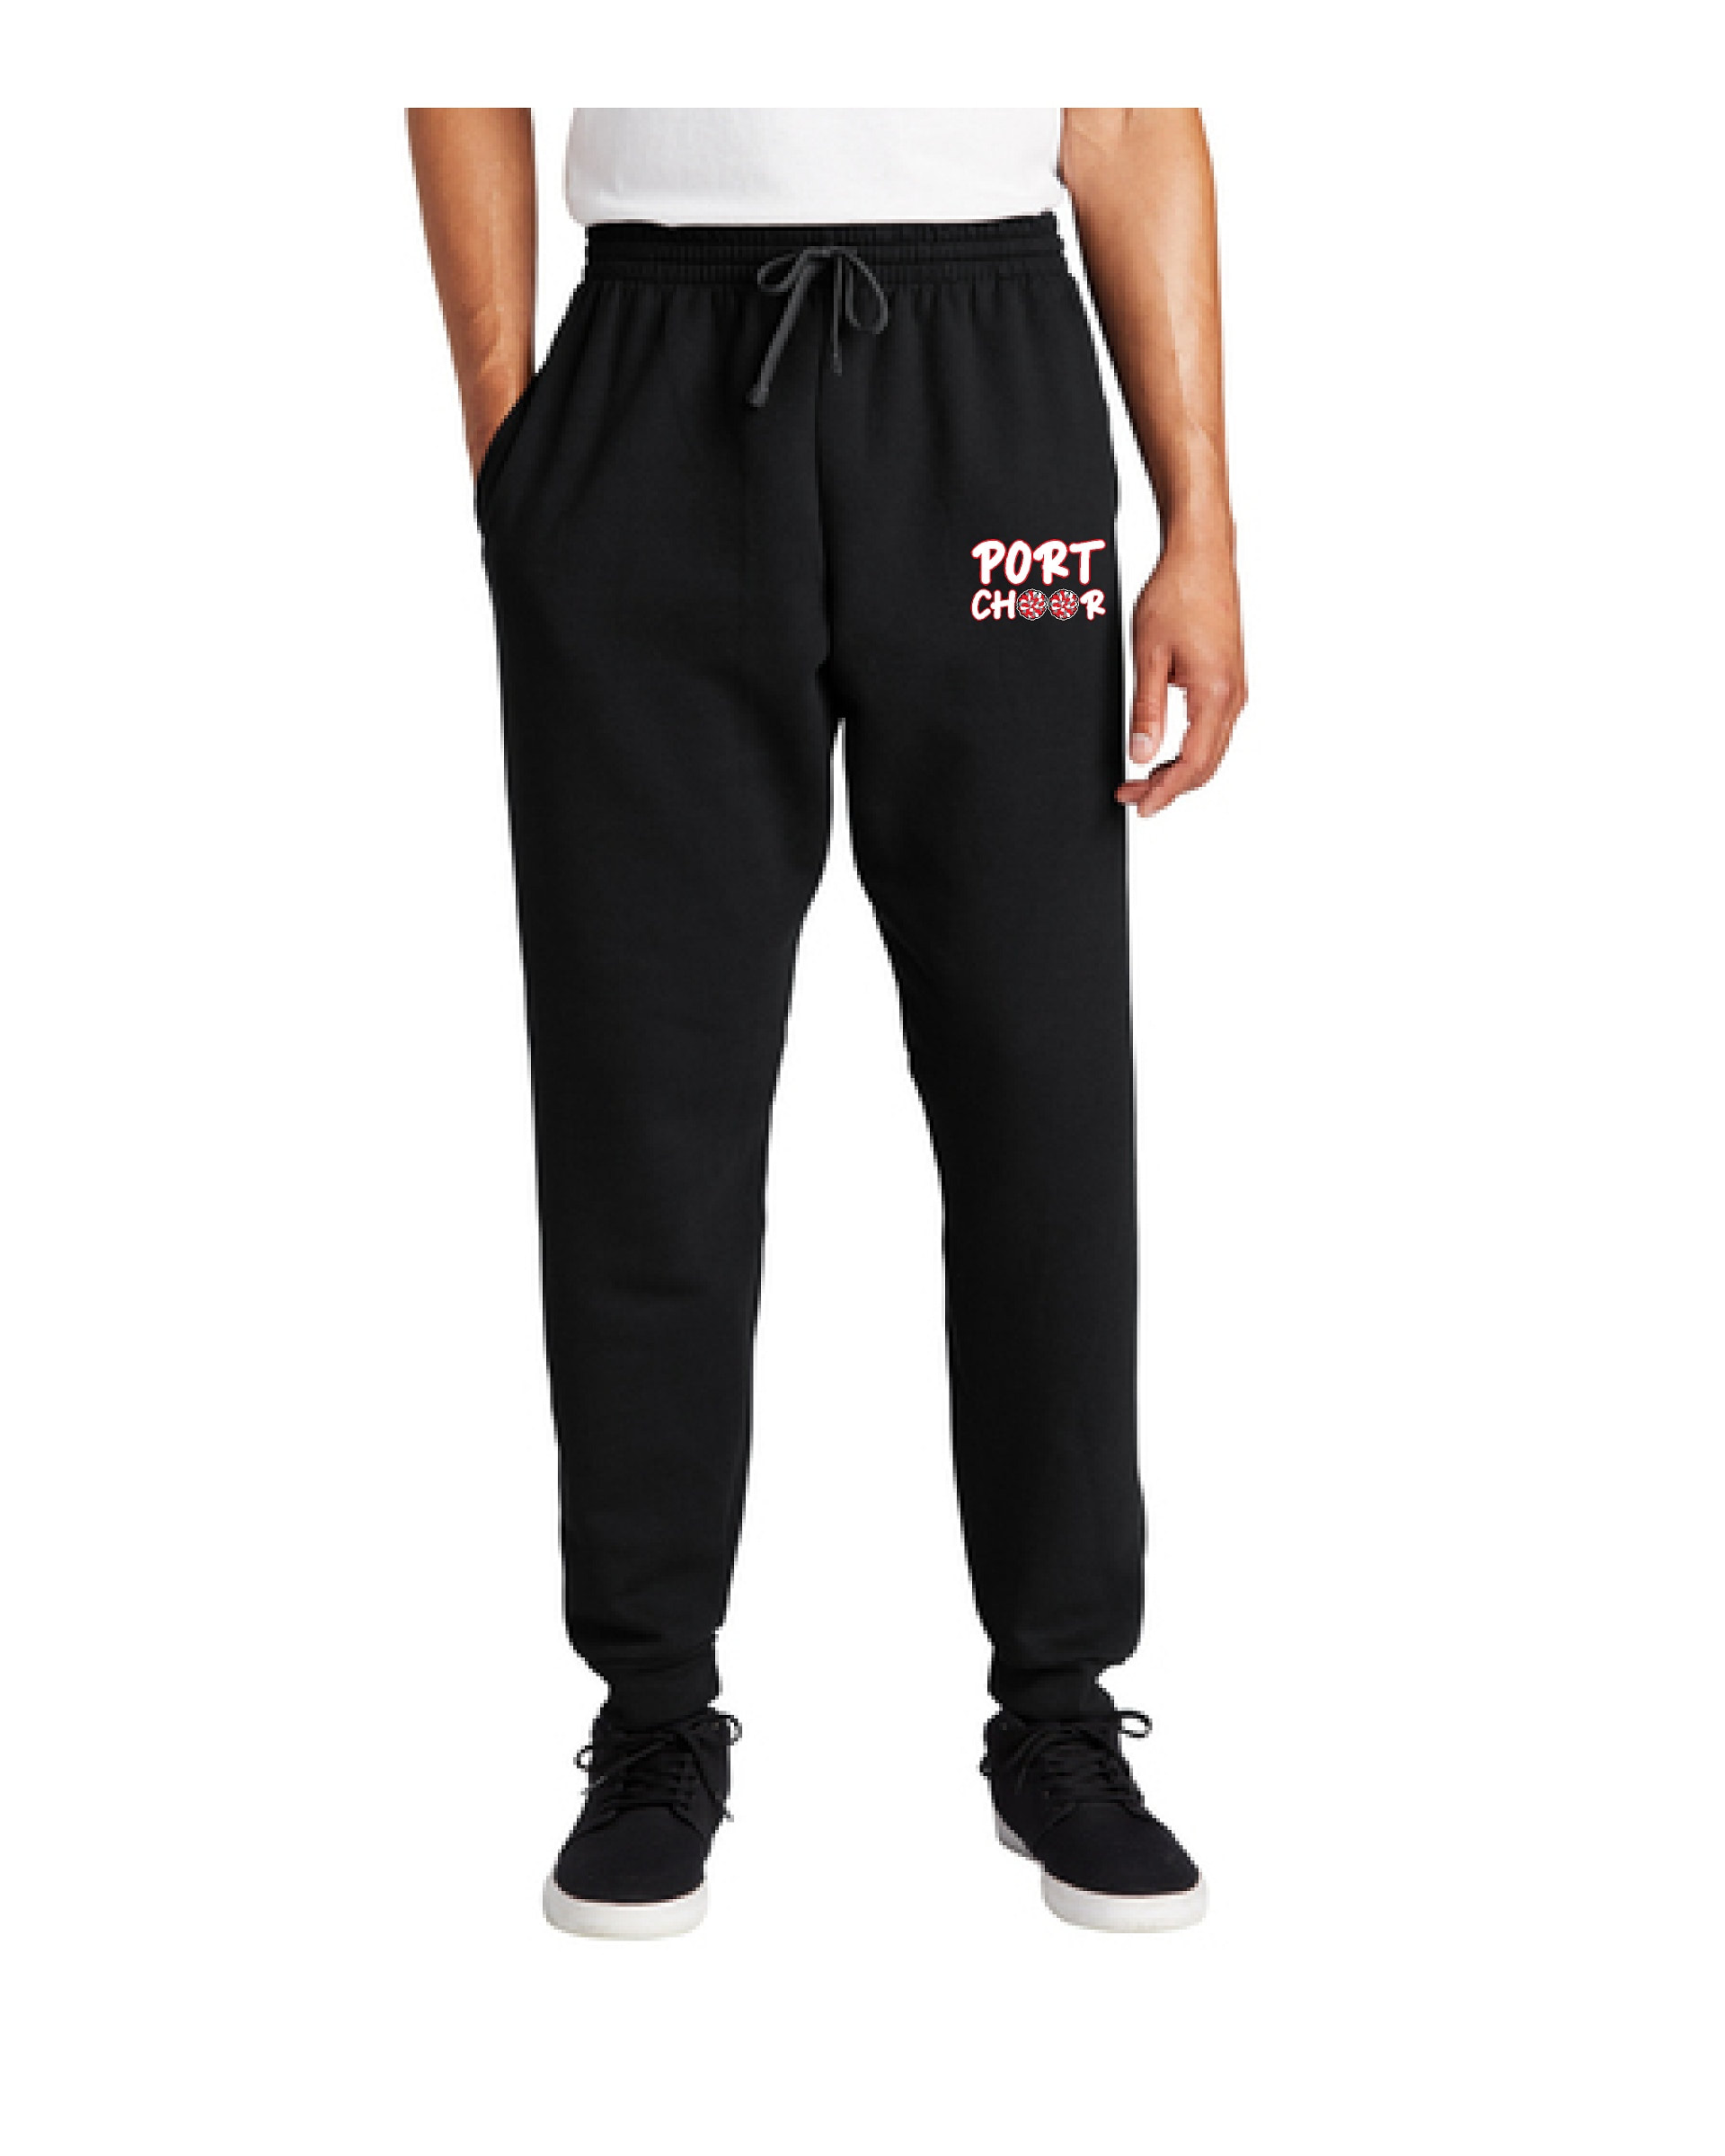 Sweatpants with Pockets - PORT CHEER